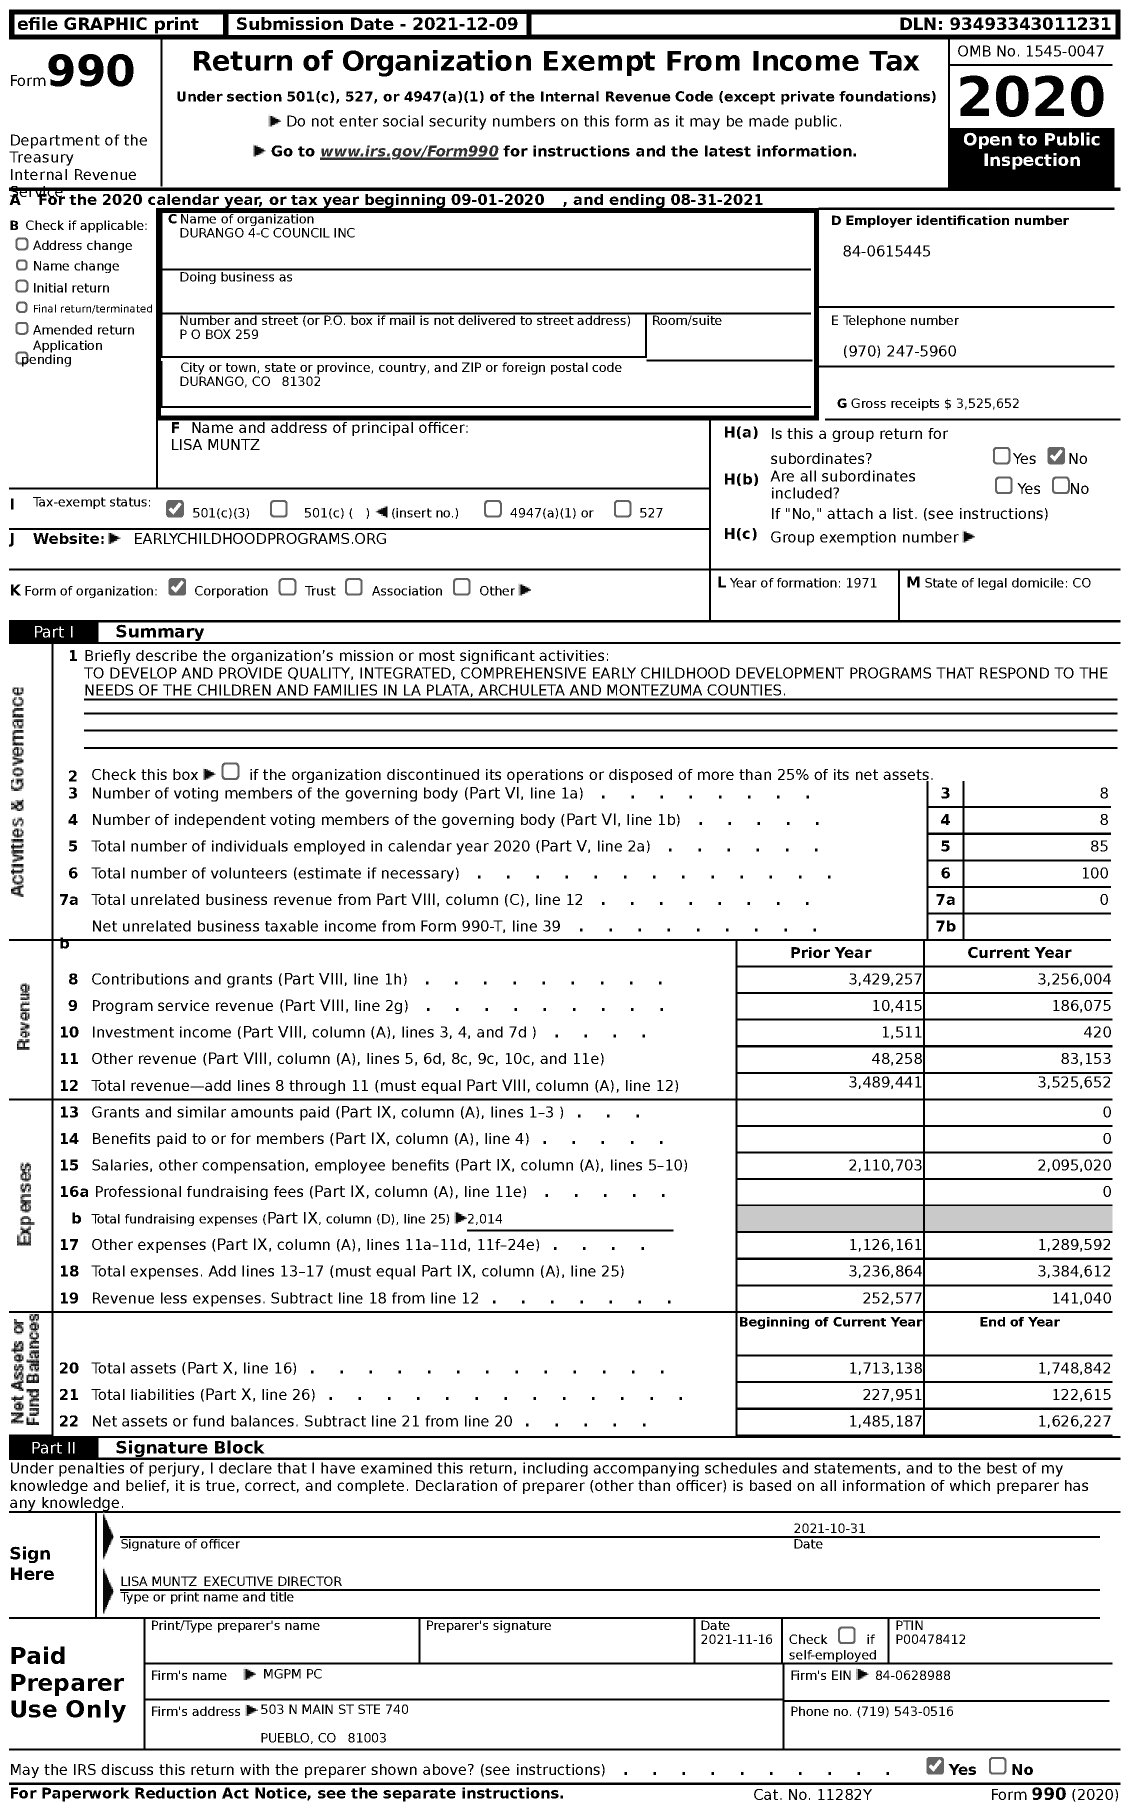 Image of first page of 2020 Form 990 for Durango 4-c Council